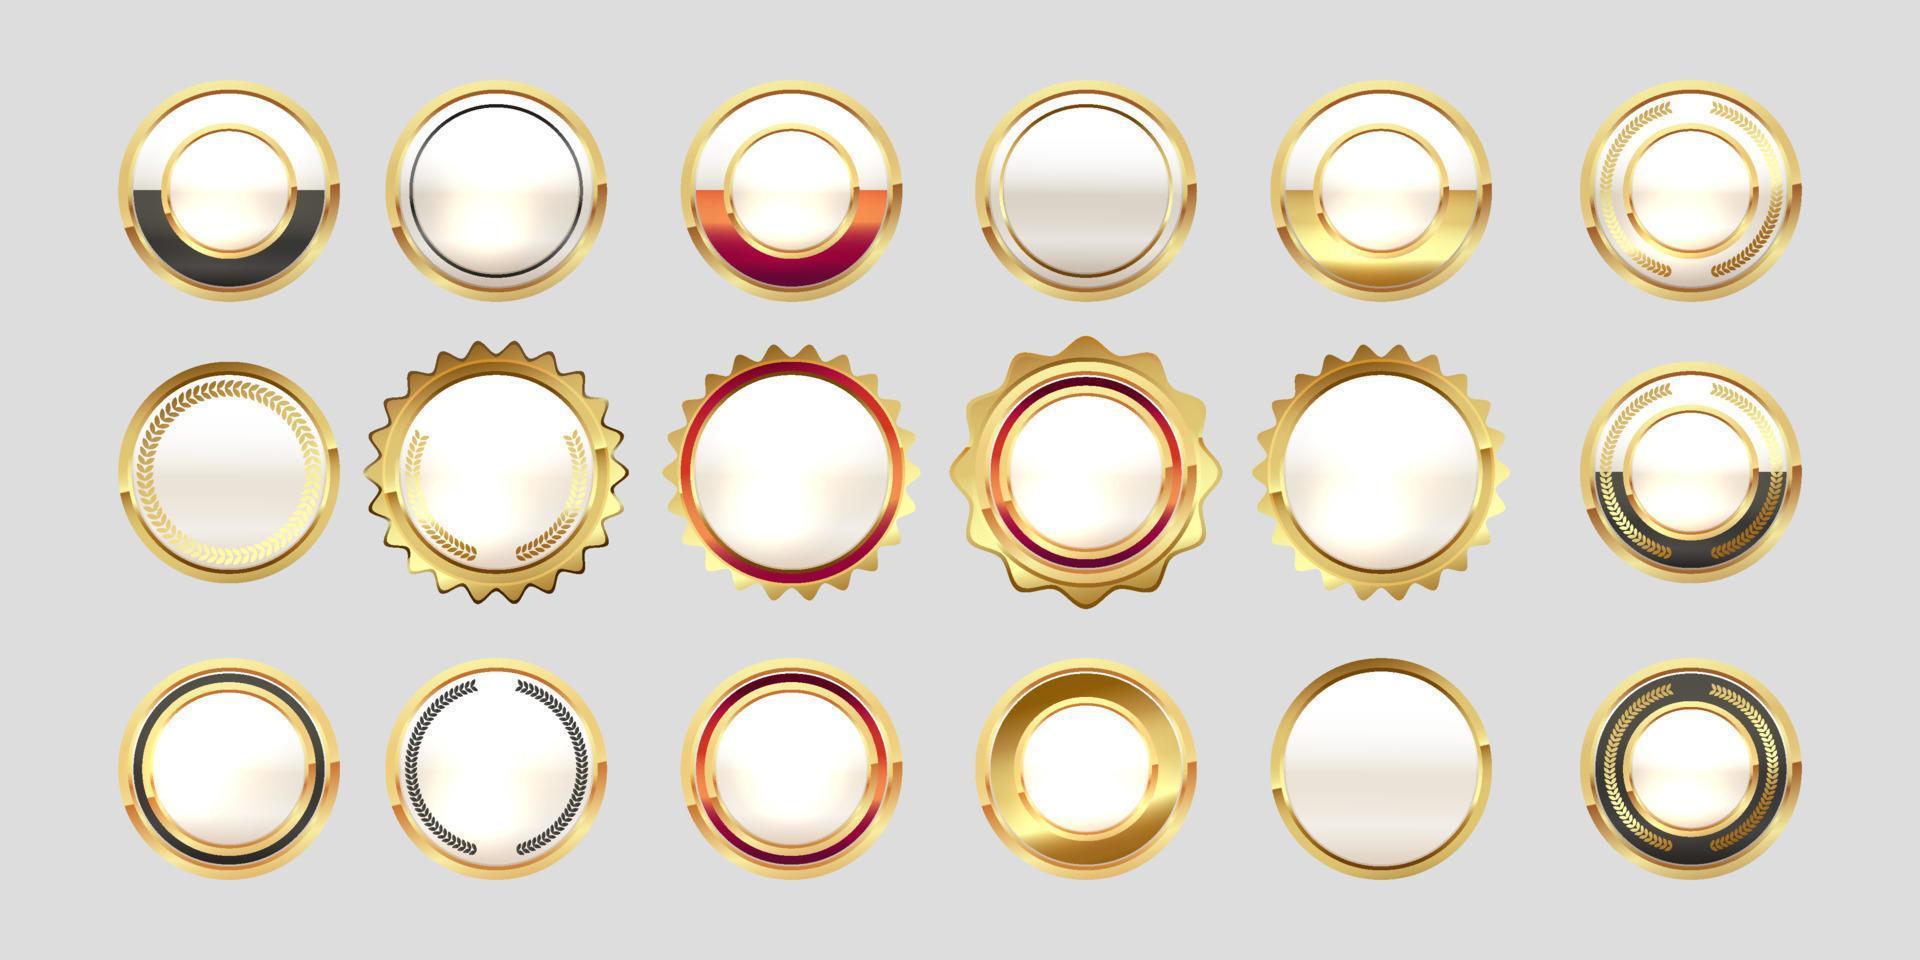 blank premium quality golden labels collection set vector